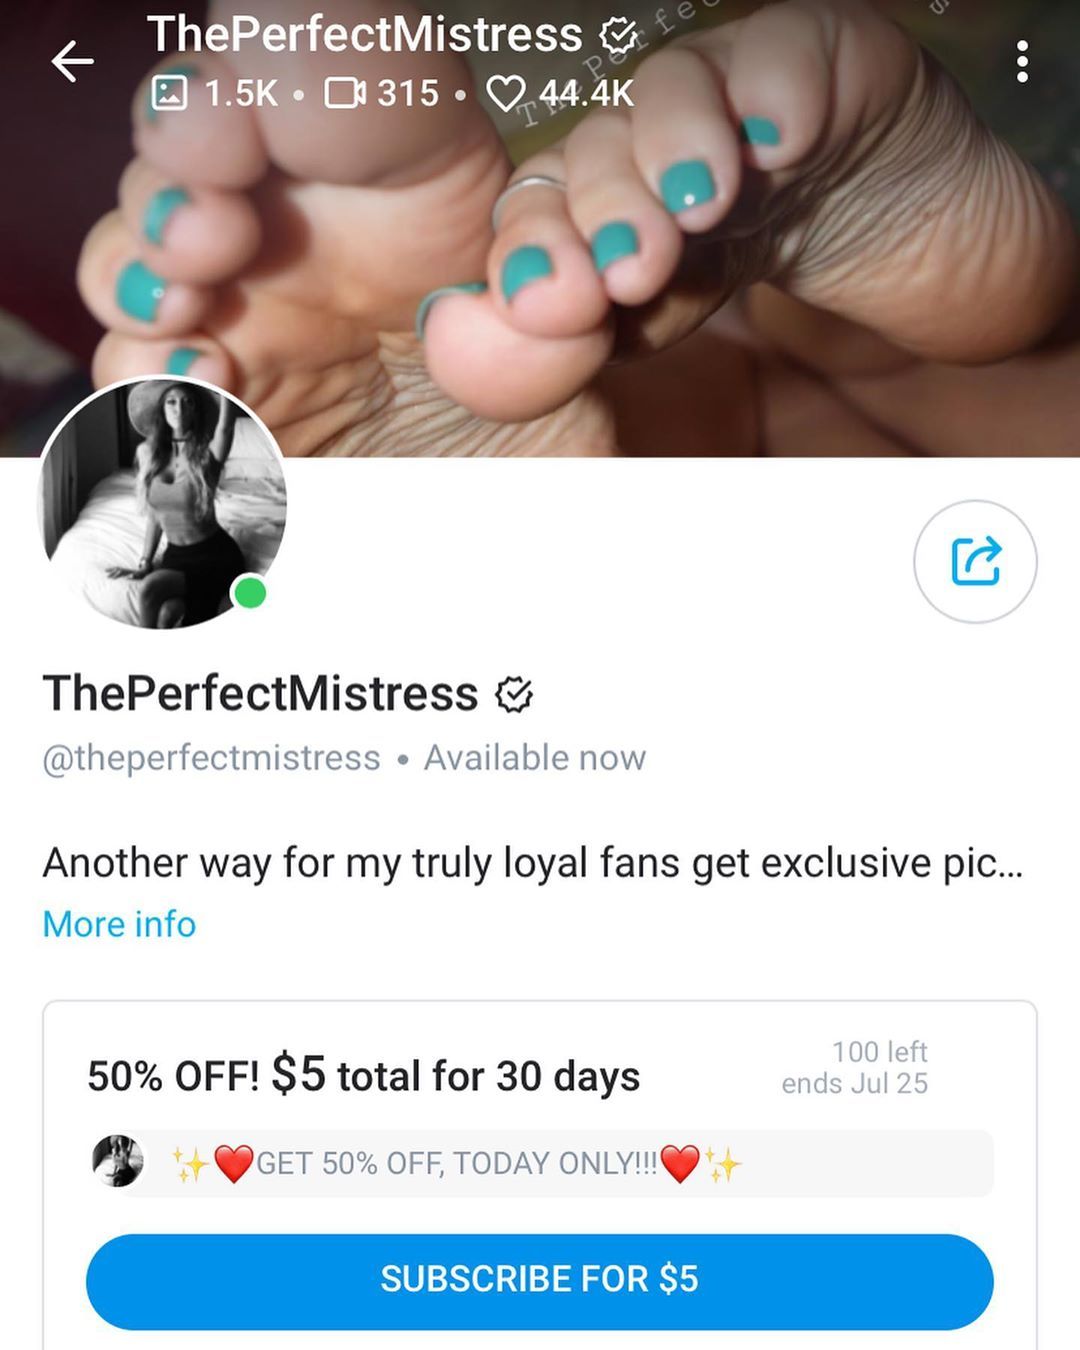 The perfect mistress instagram